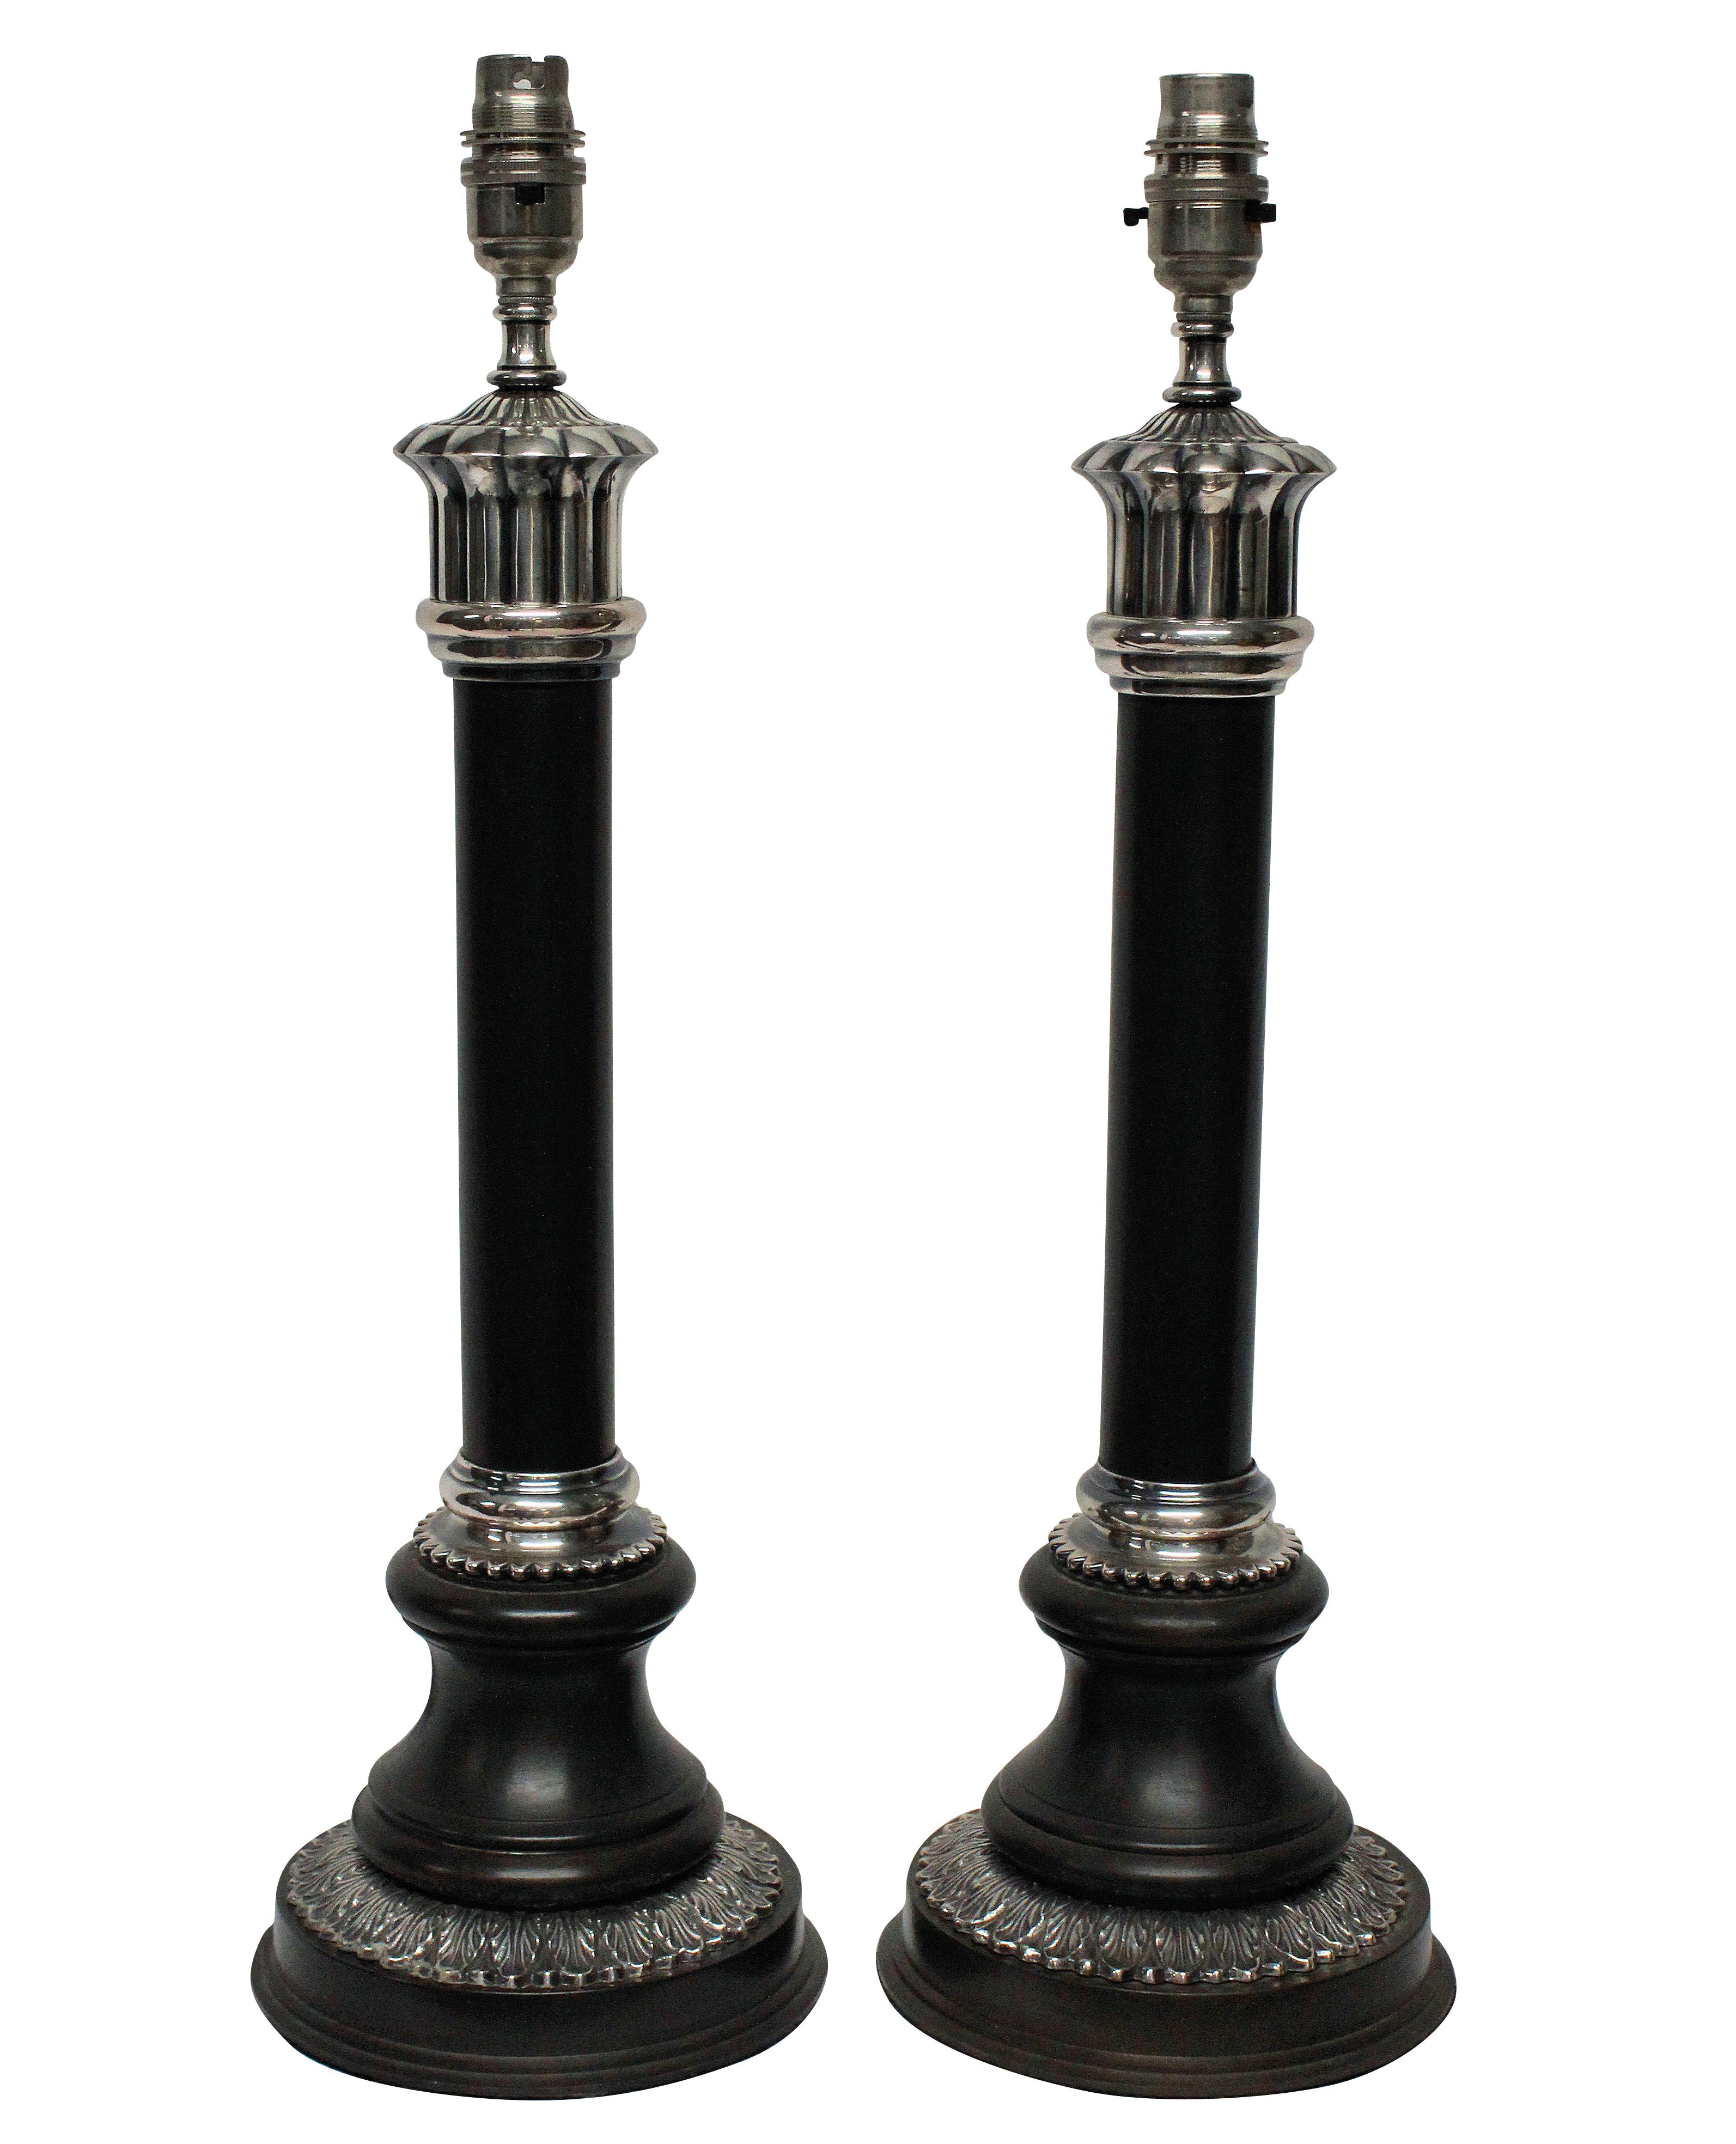 A pair of English bronzed and silver plated neoclassical column table lamps.